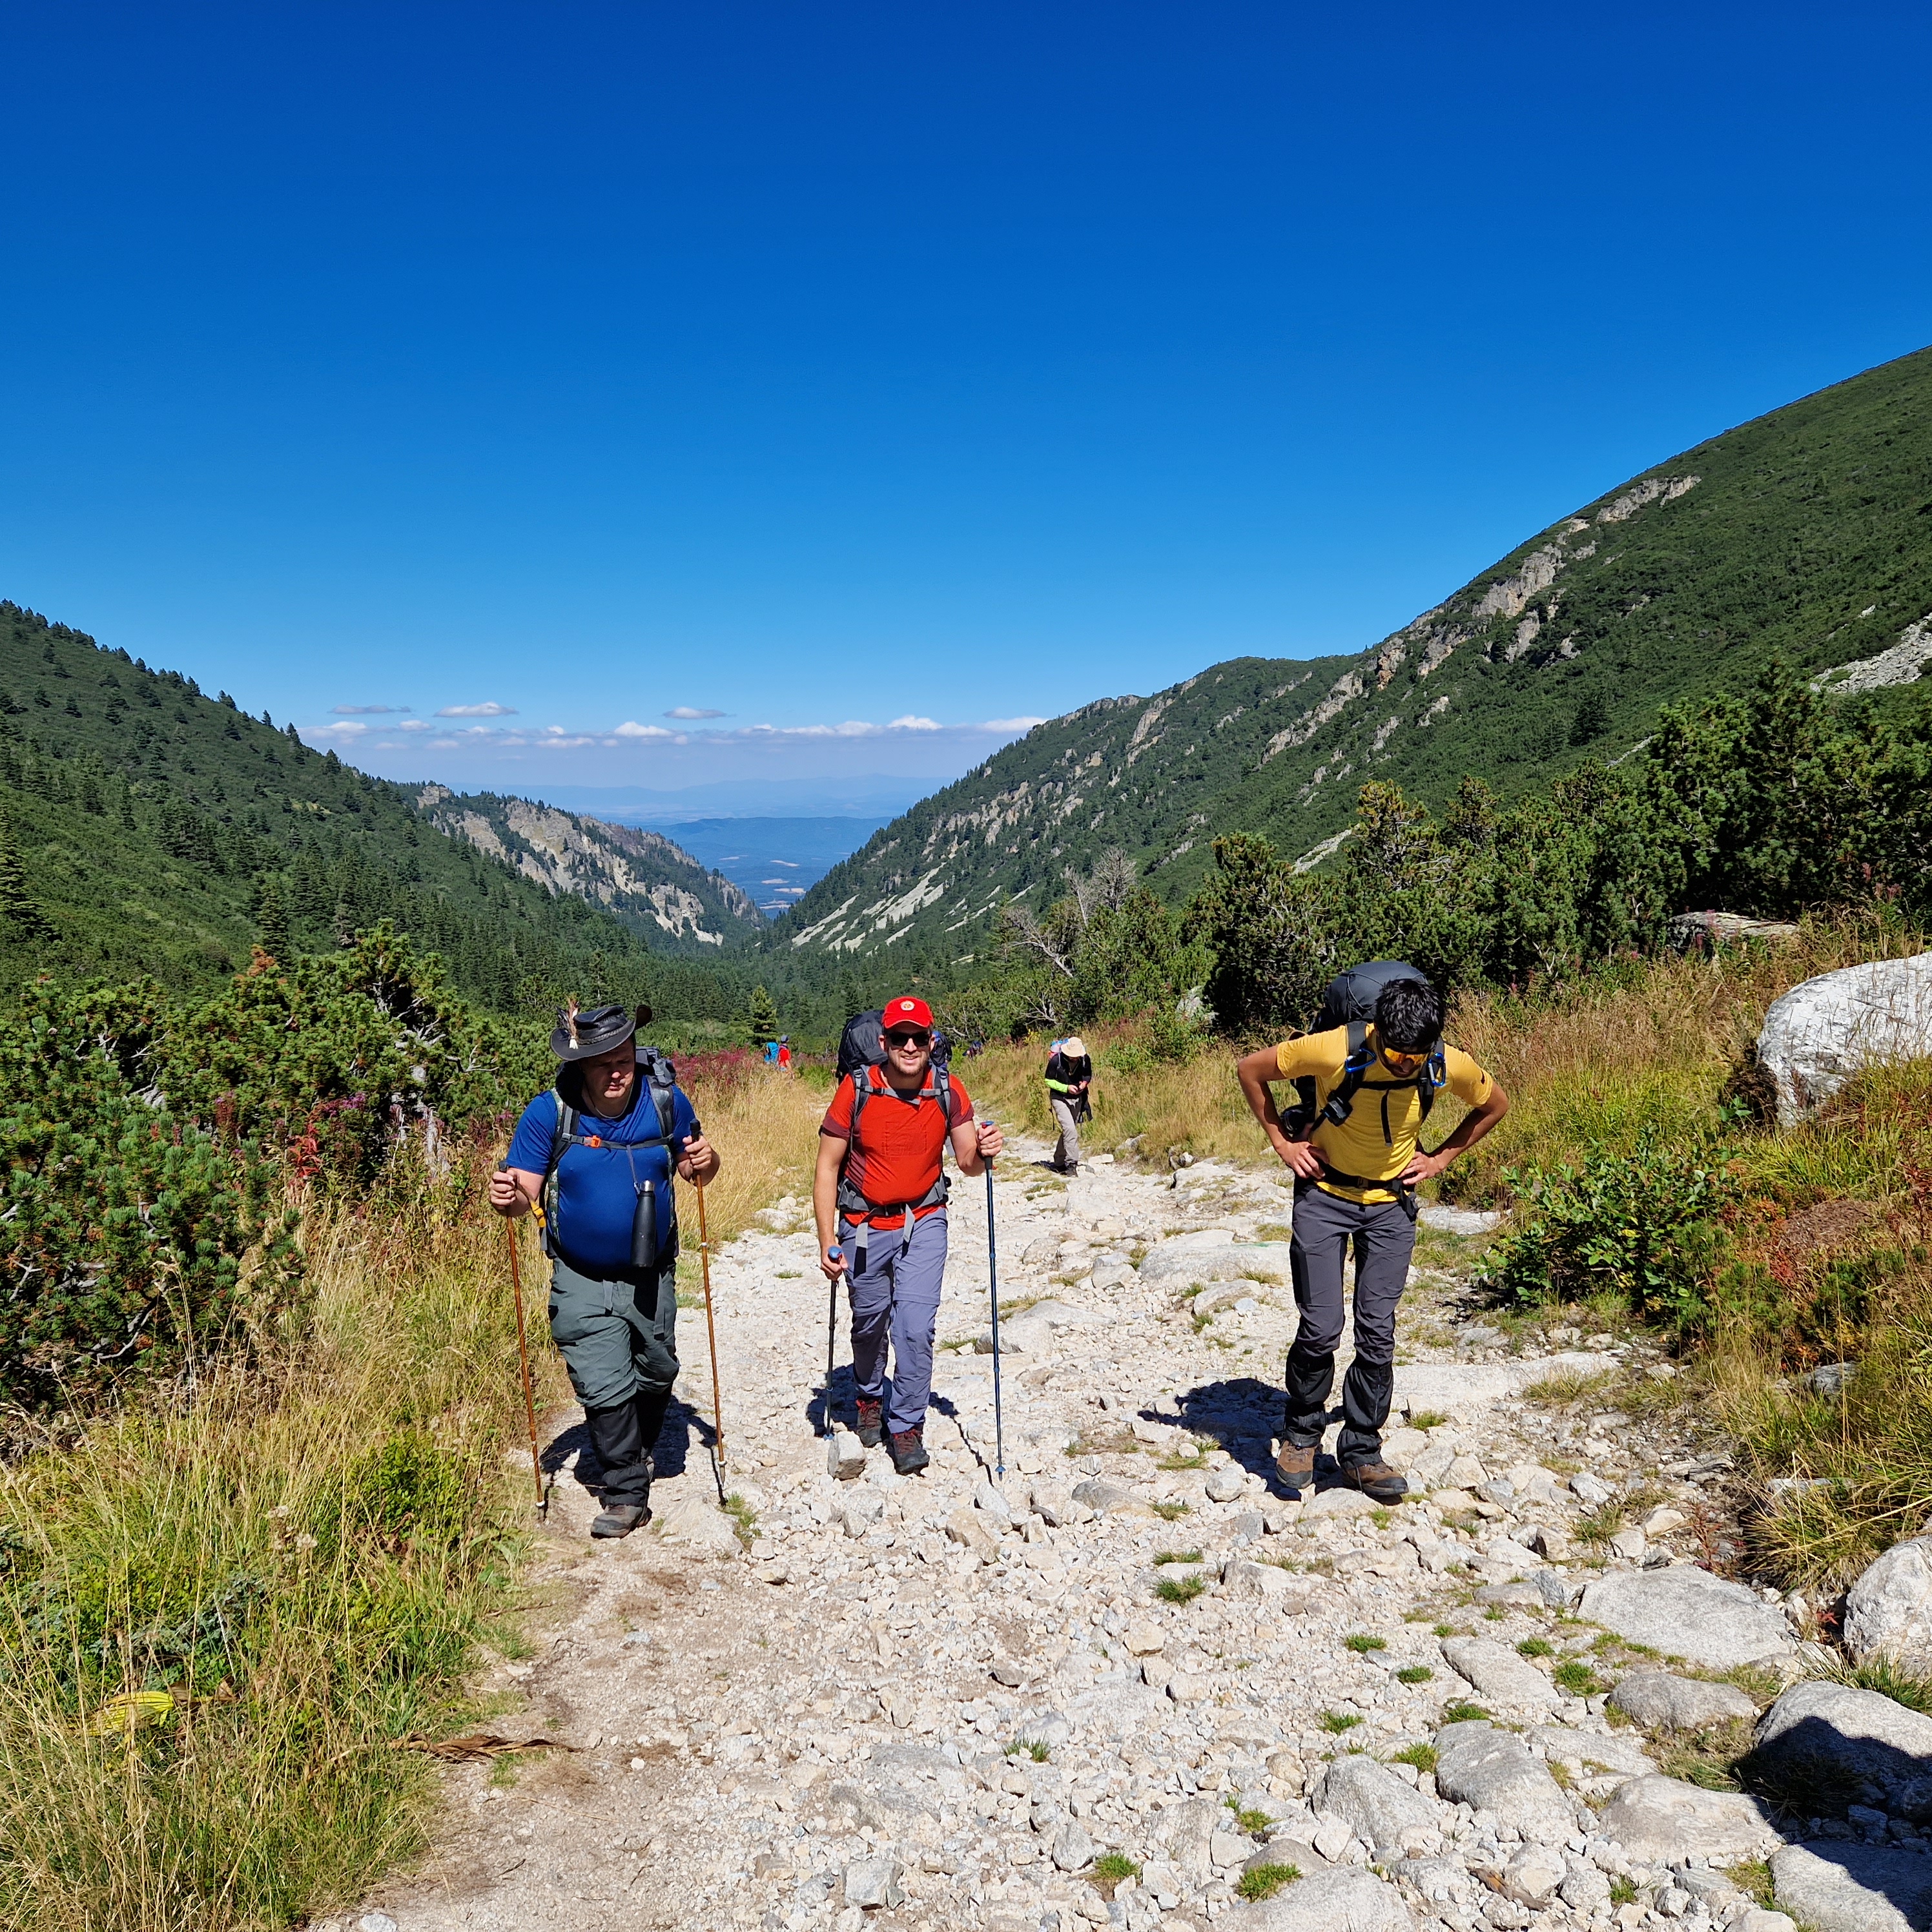 TEN partners from Serbia and North Macedonia on the trek up Musala Mountain